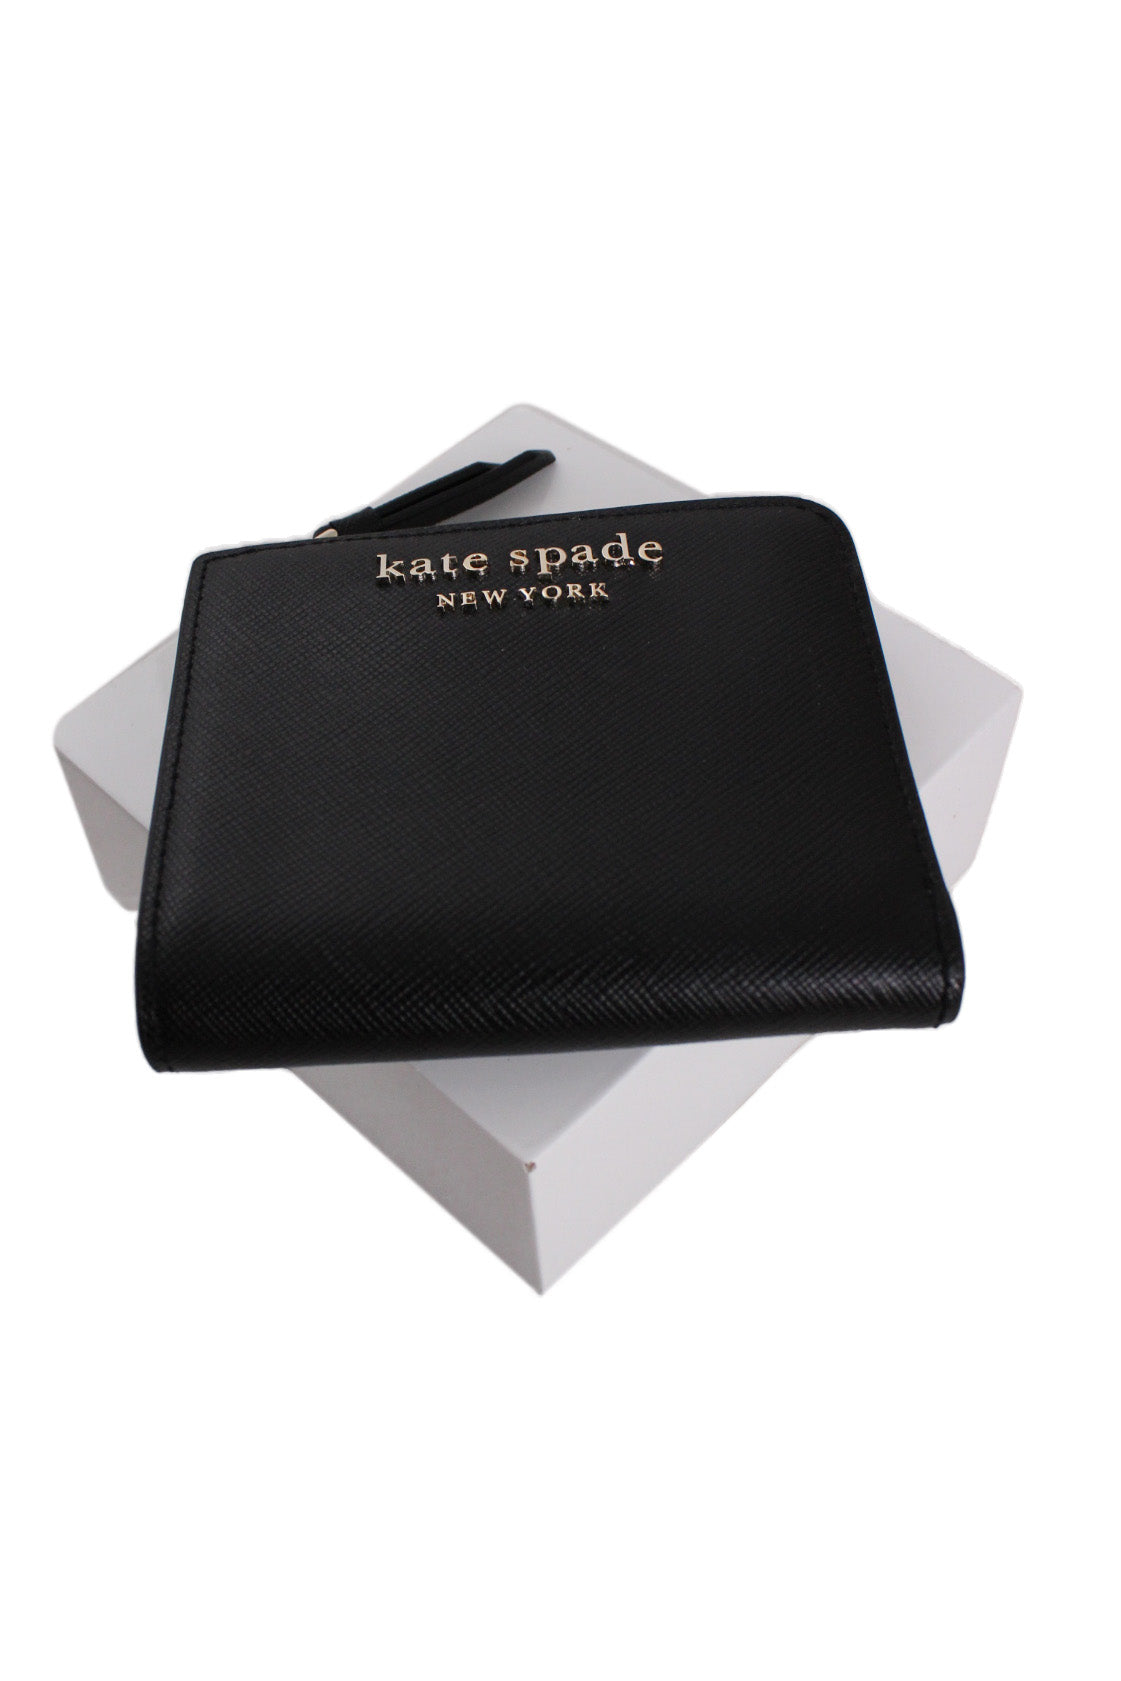 above three-quarter angle kate spade black ‘cameron’ bifold wallet featuring 'kate spade' 'new york' gold-toned text.